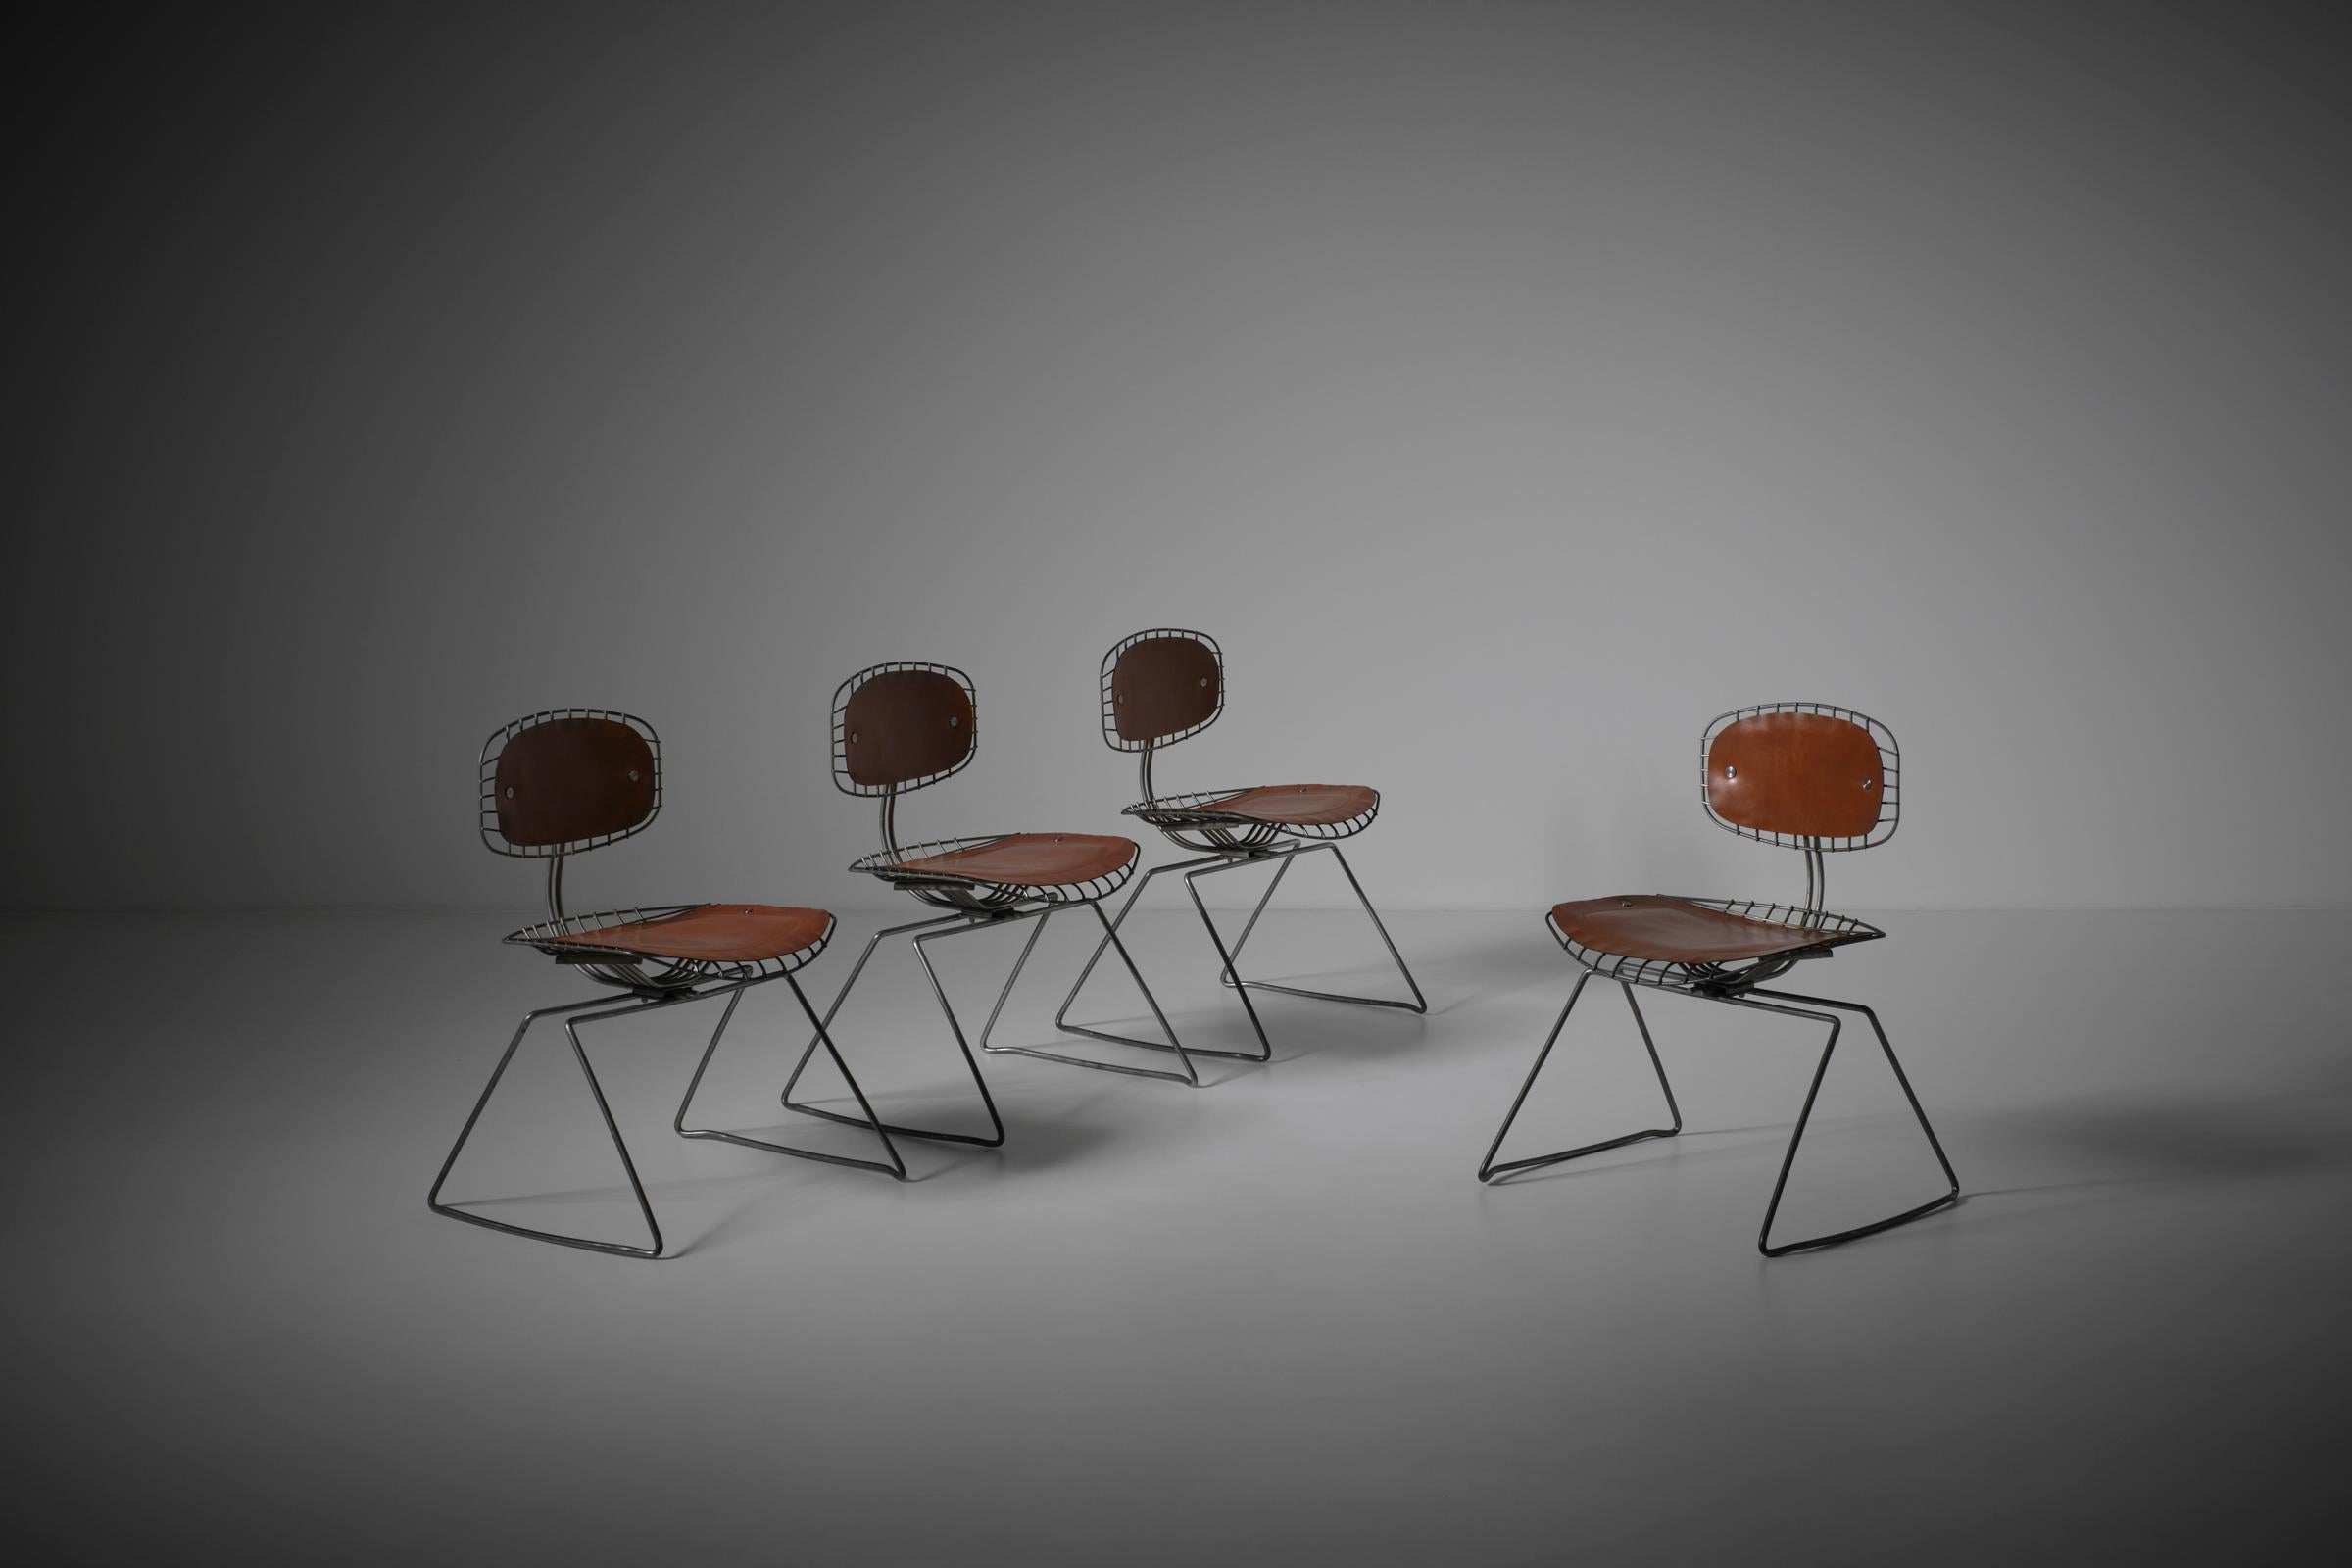 Set of four 'Beaubourg' chairs by Michel Cadestin & Georges Laurent, France 1976. Iconic chairs designed for the famous Centre Pompidou in Paris. The galvanized metal frame makes a stunning contrast with the cognac colored saddle leather seat and